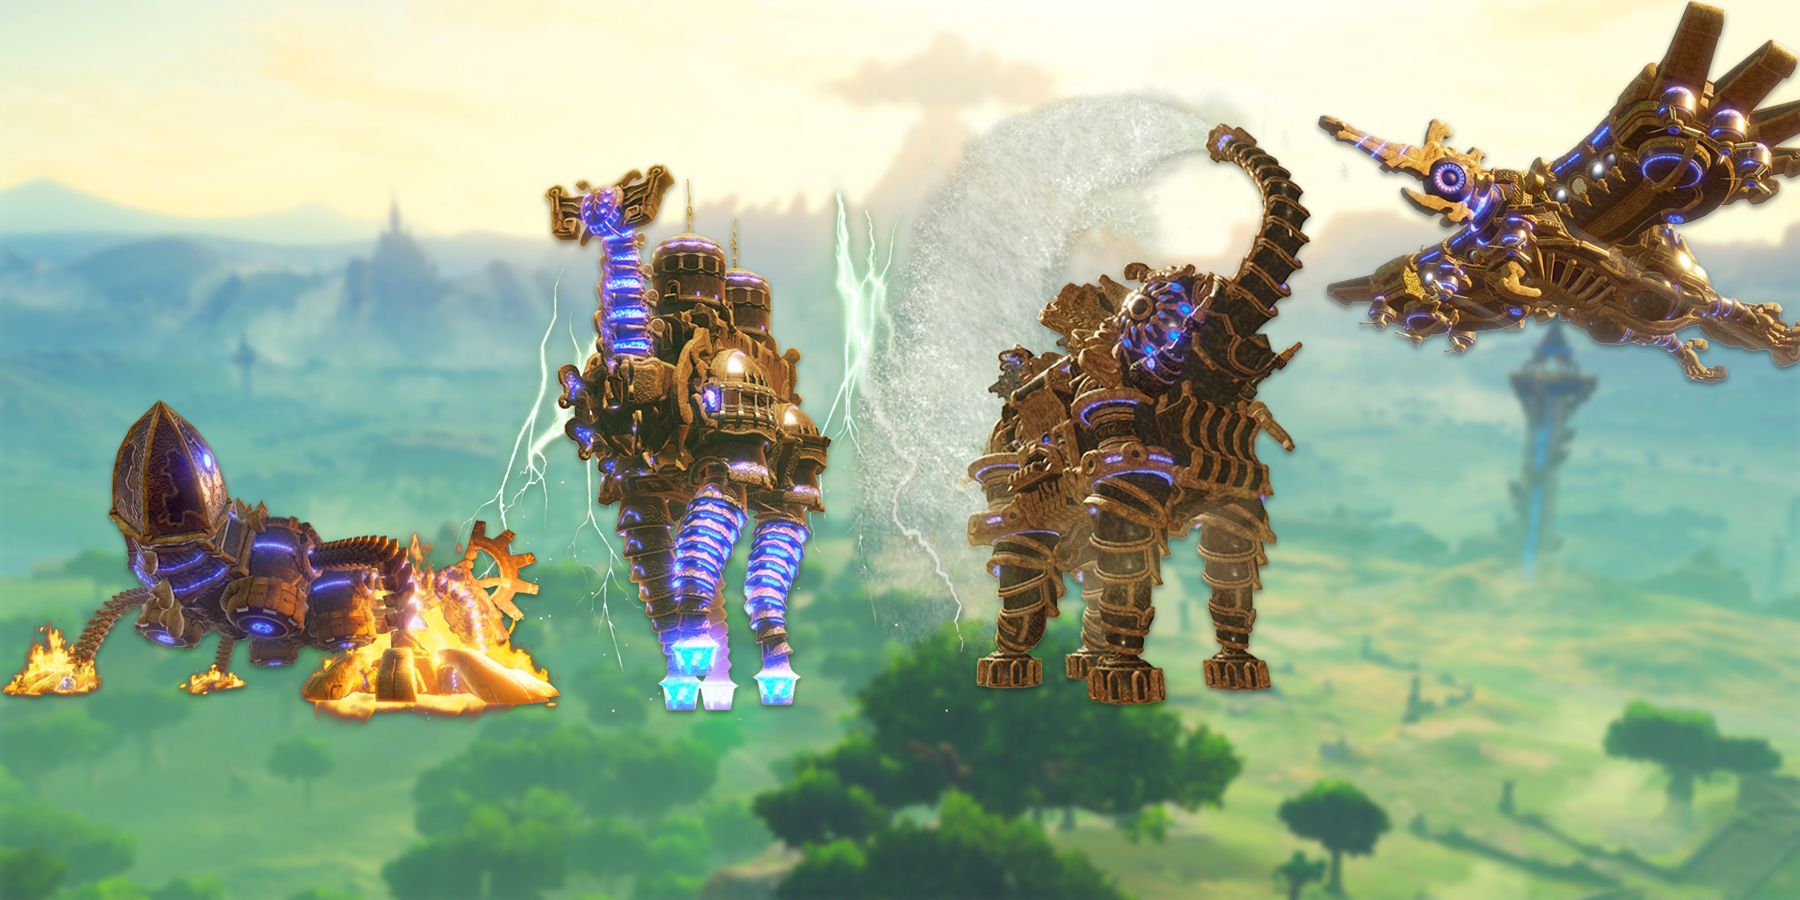 The four mechanized Divine Beasts from Breath of the Wild - the lizard Vah Rudania, the camel Vah Naboris, the elephant Vah Ruta, and the bird Vah Medoh - superimposed on a screenshot of the game's Hyrule.